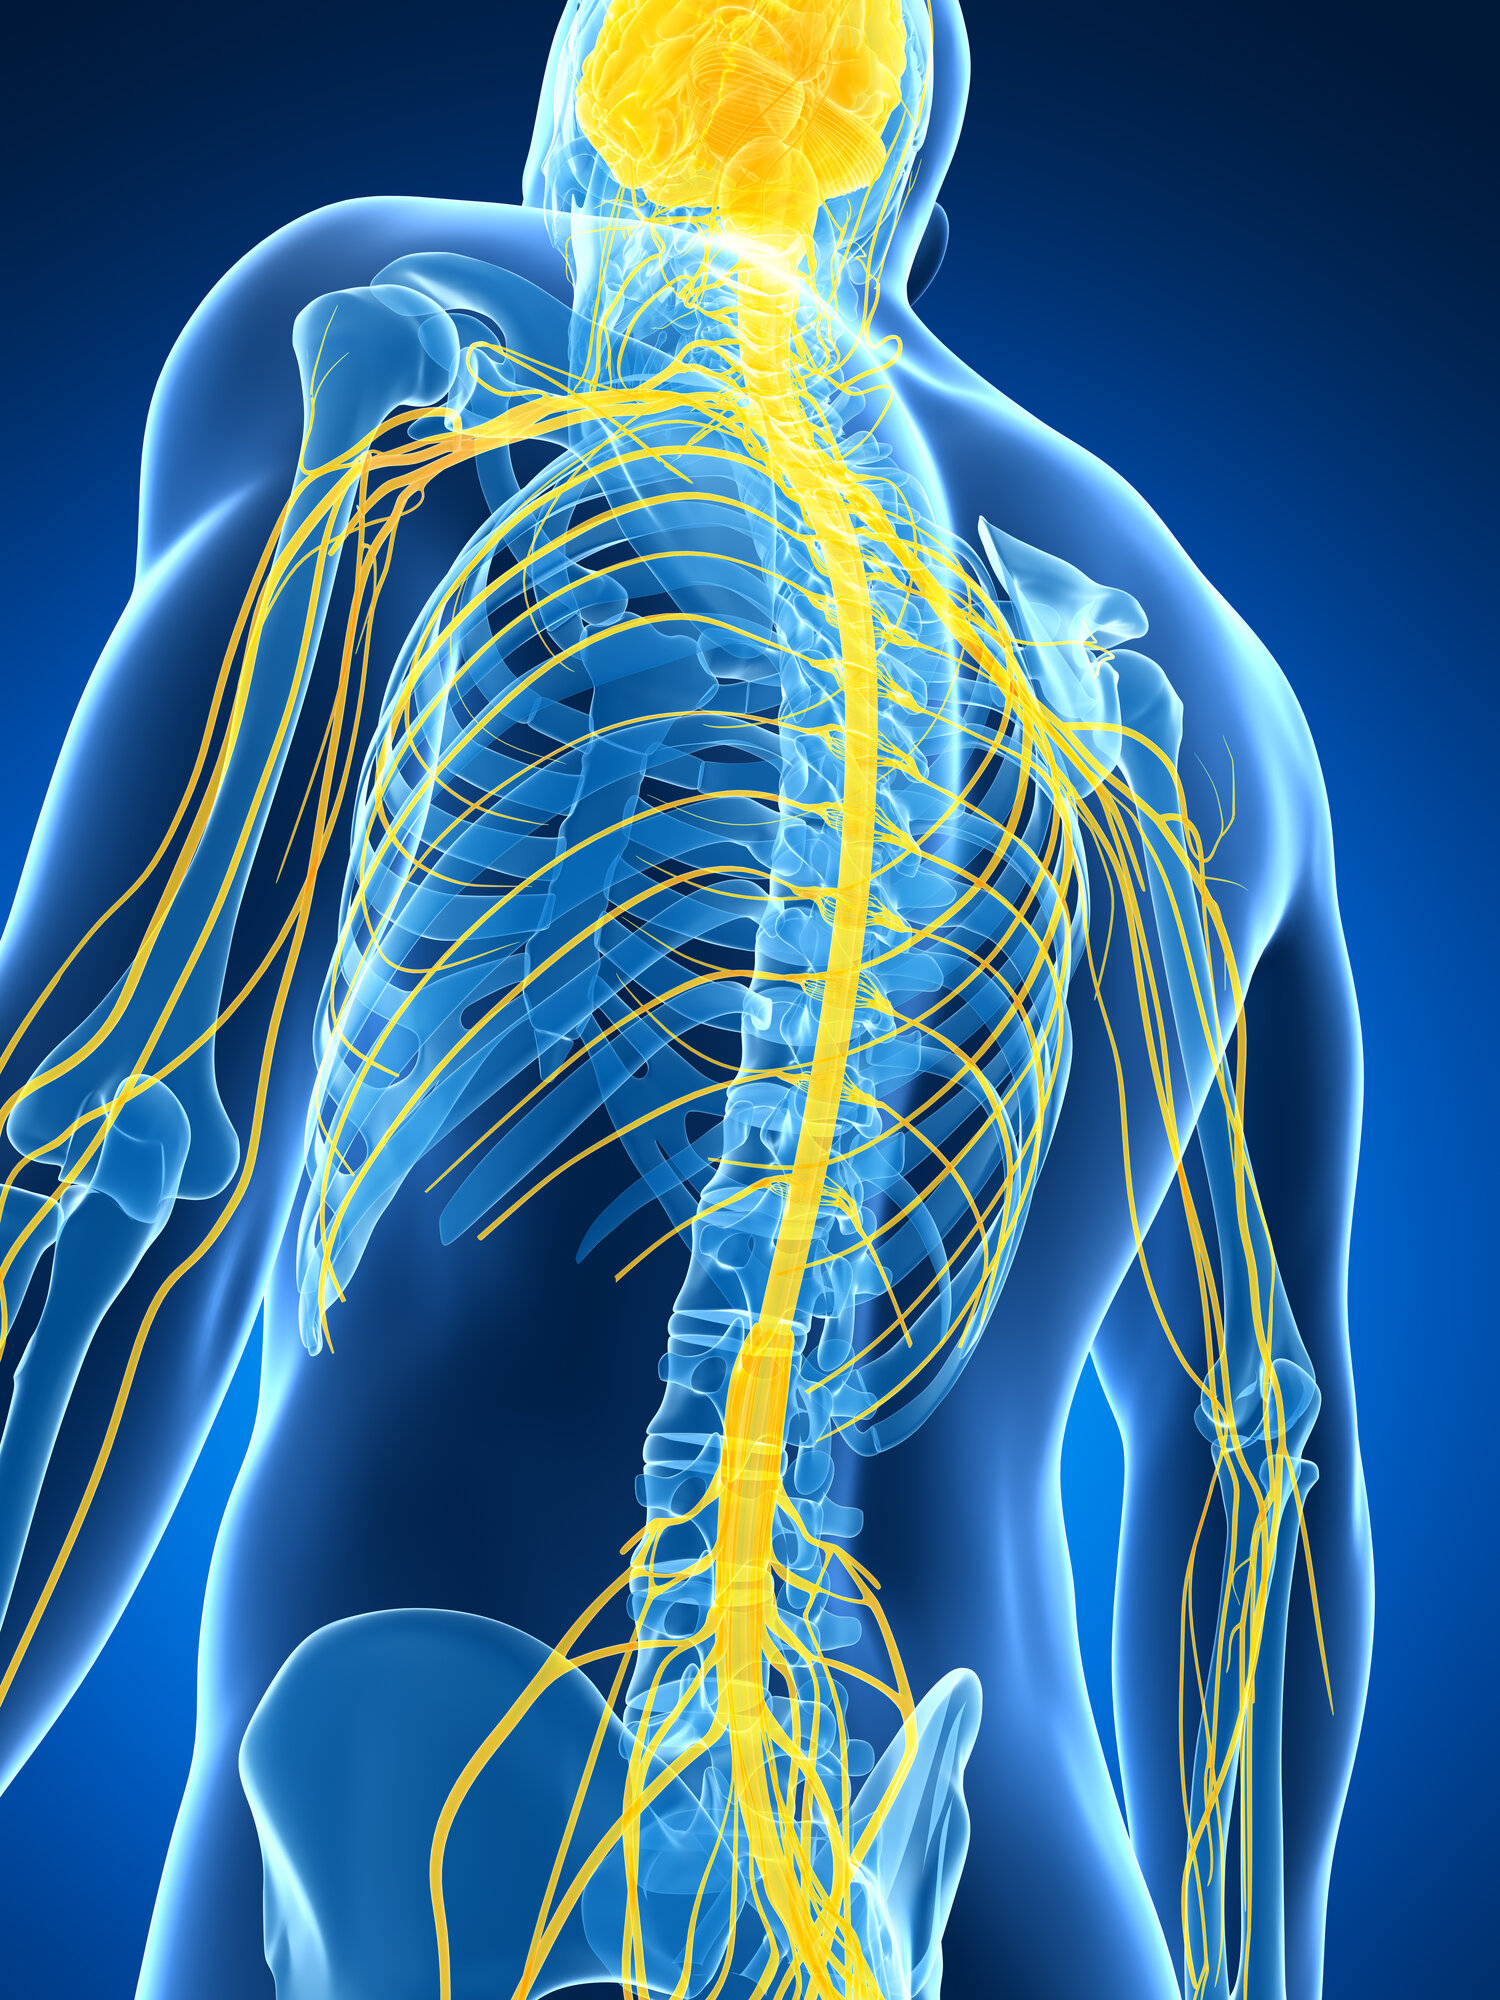 what does neuropathic pain mean?